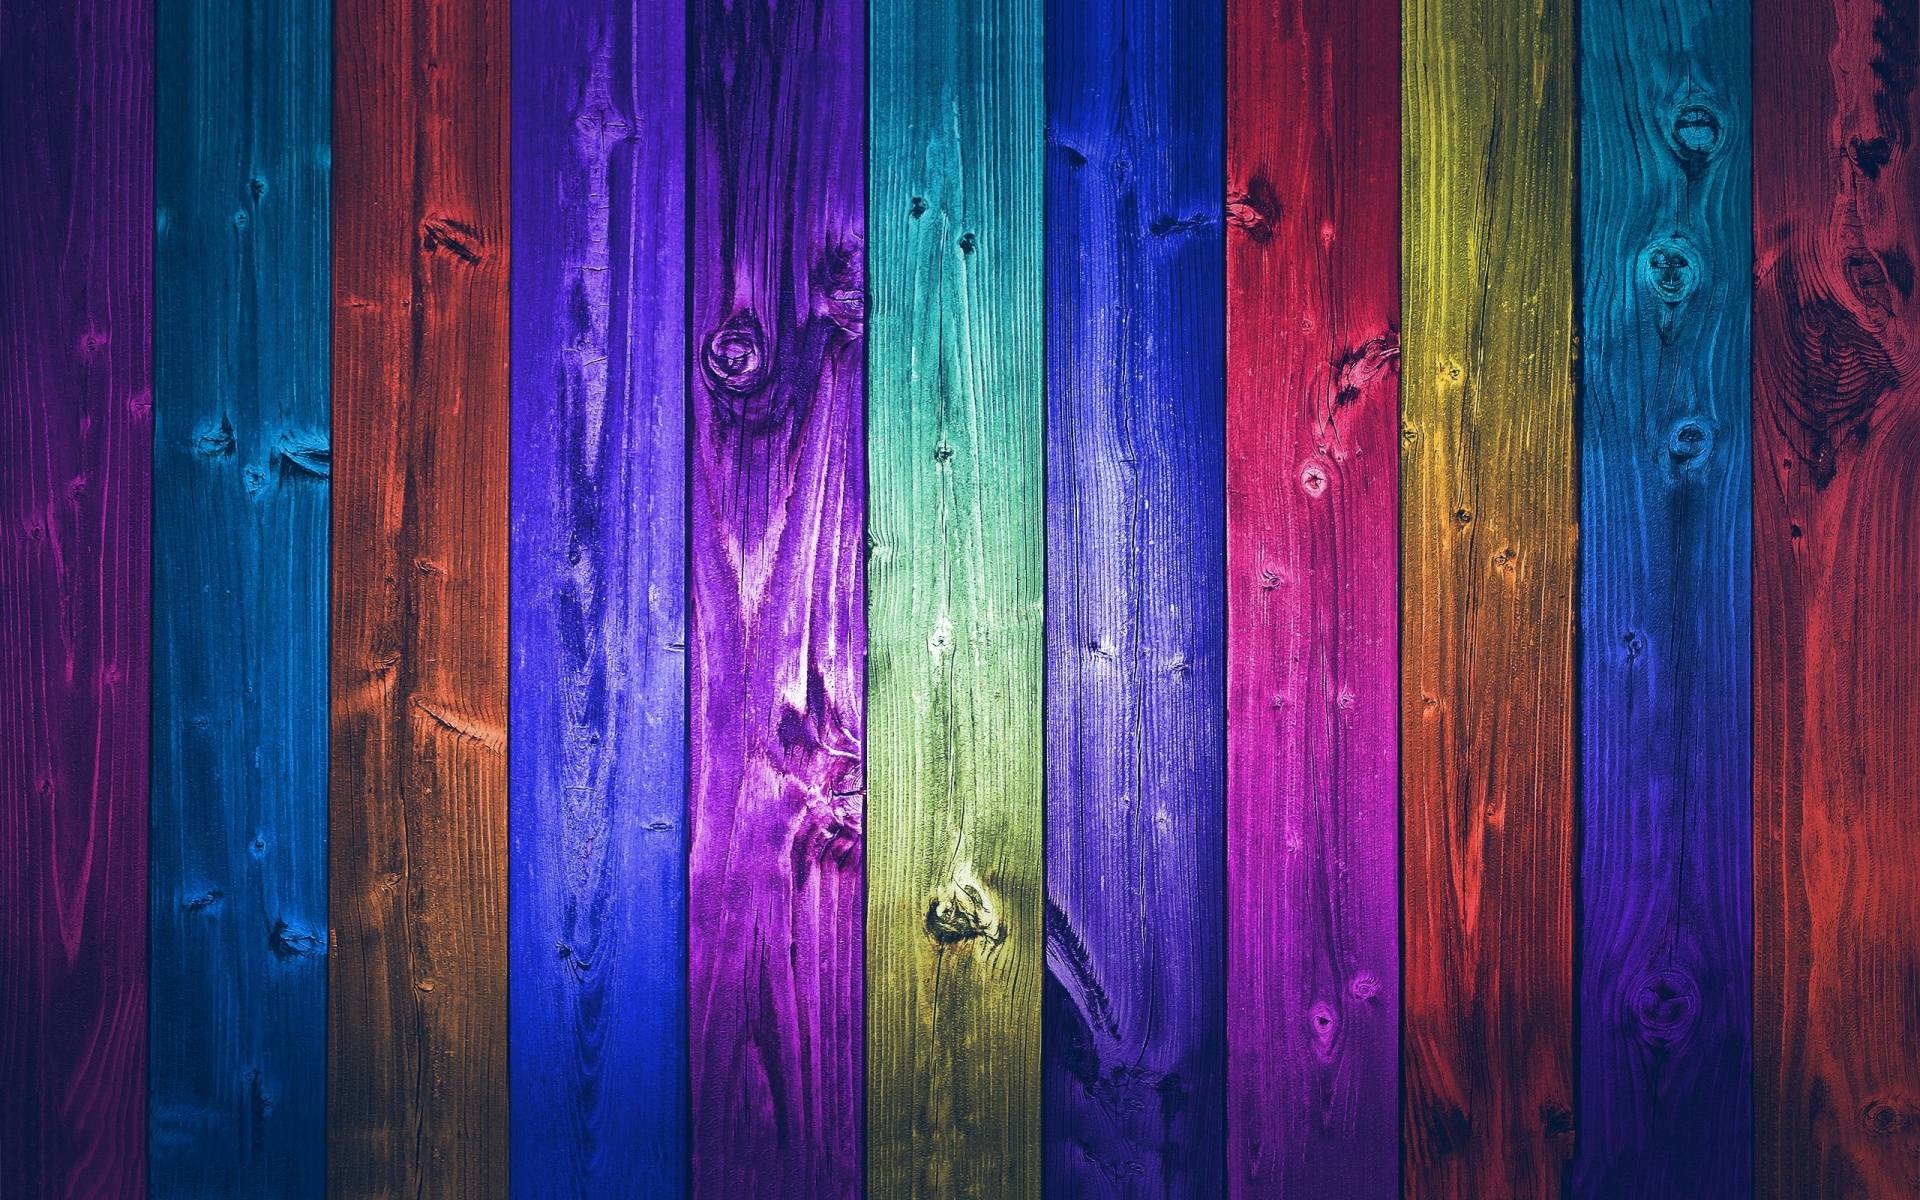 Colored Wood Board Wallpaper 1920x1200 px Free Download